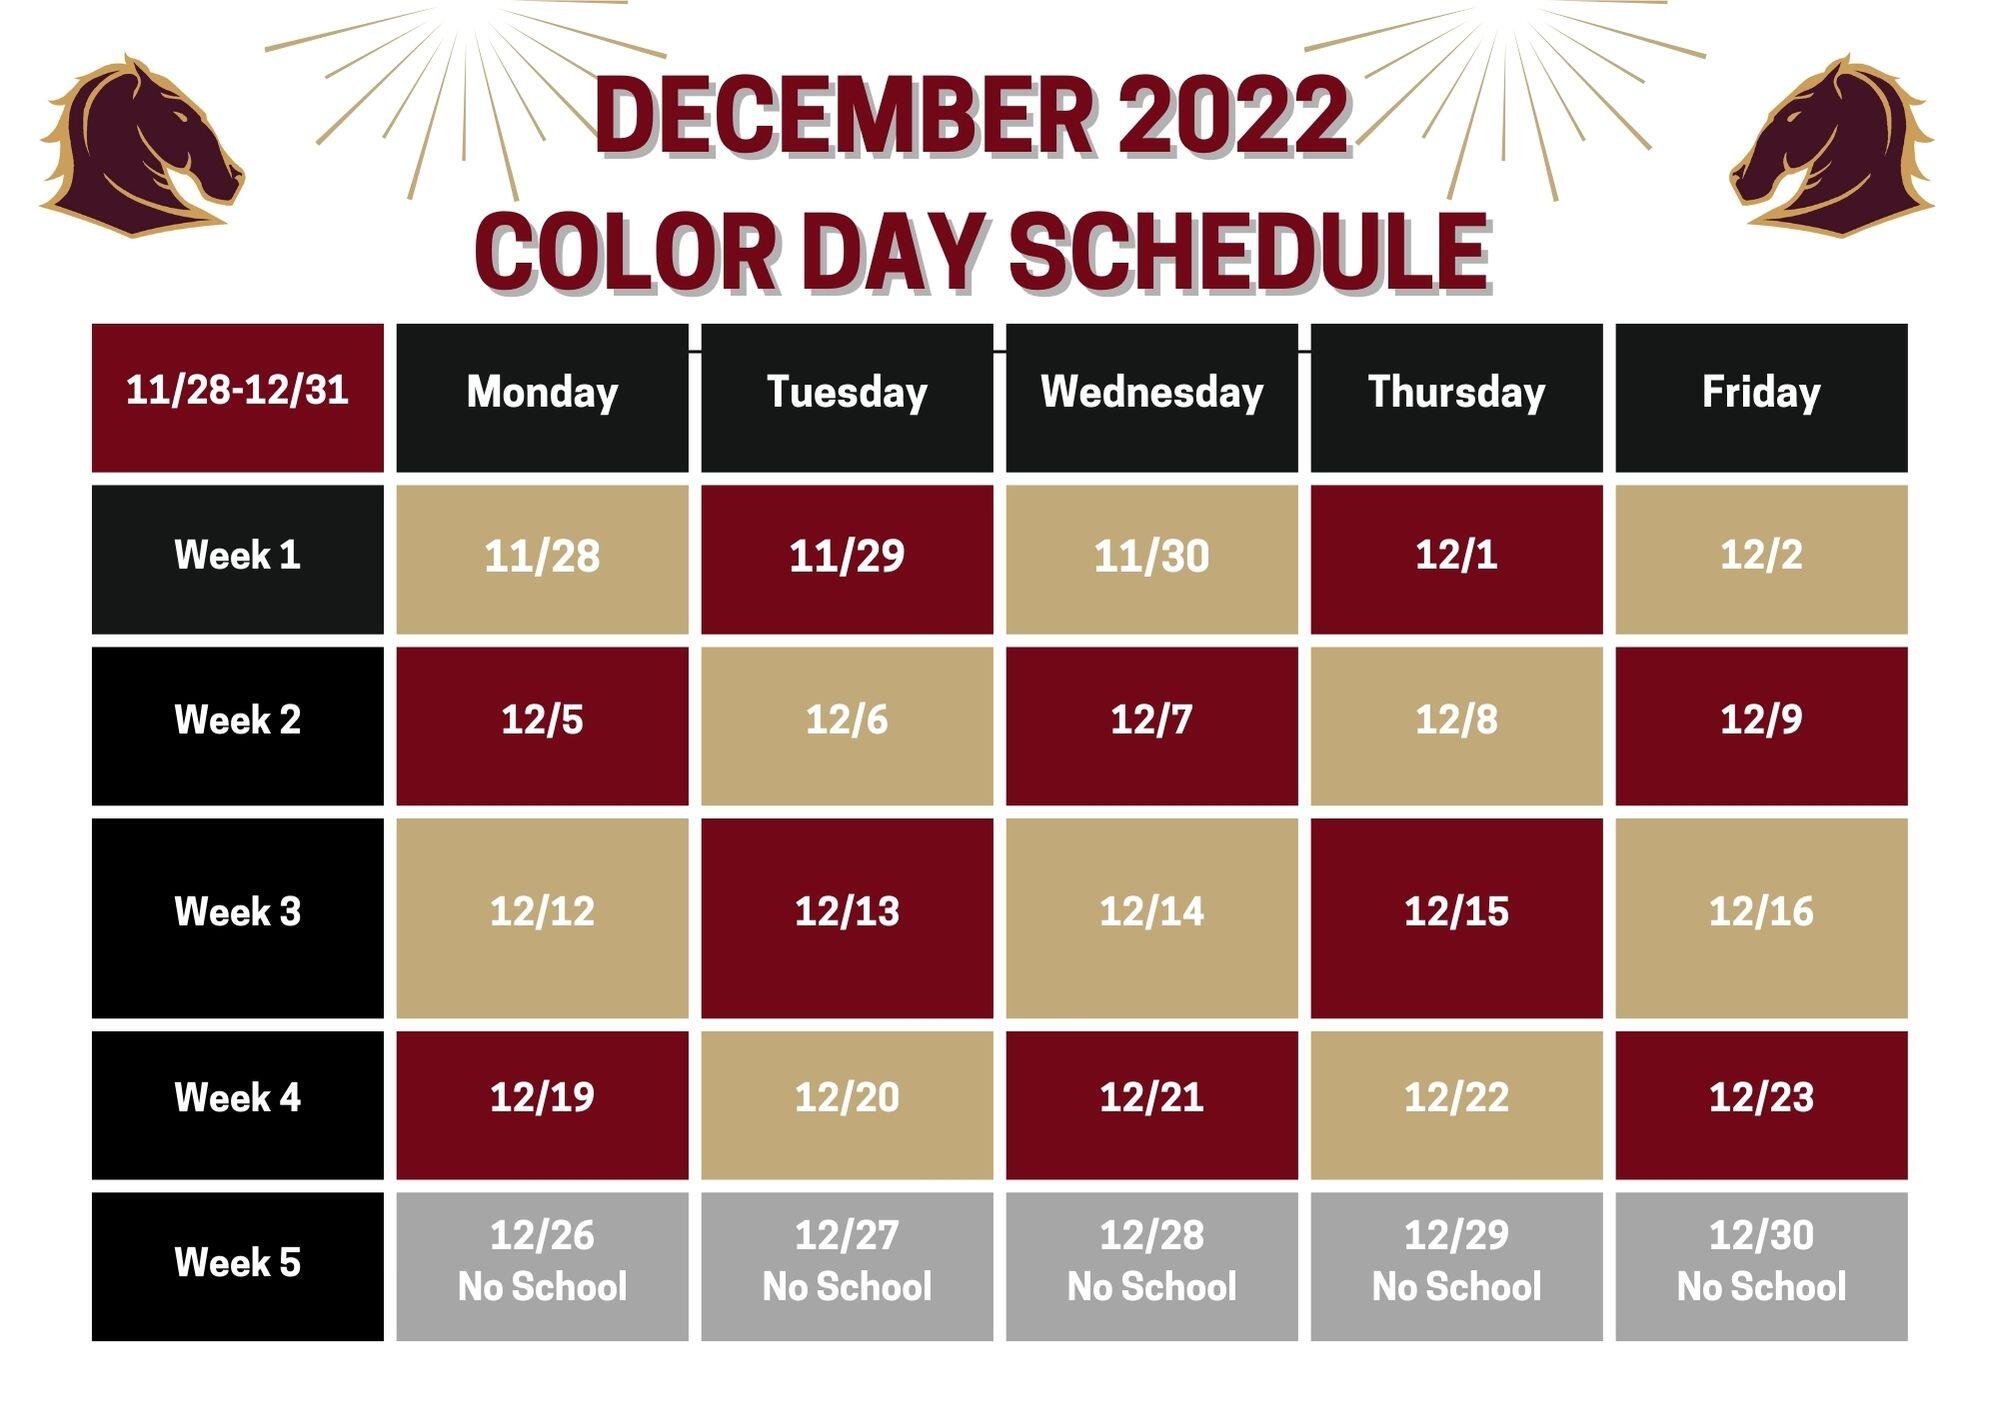 December 2022 Color Day Calendar, Alternating maroon and gold days with 10/3 being maroon and alternating from that date. No school 10/10 so the alternating colors skip that day and continue on.